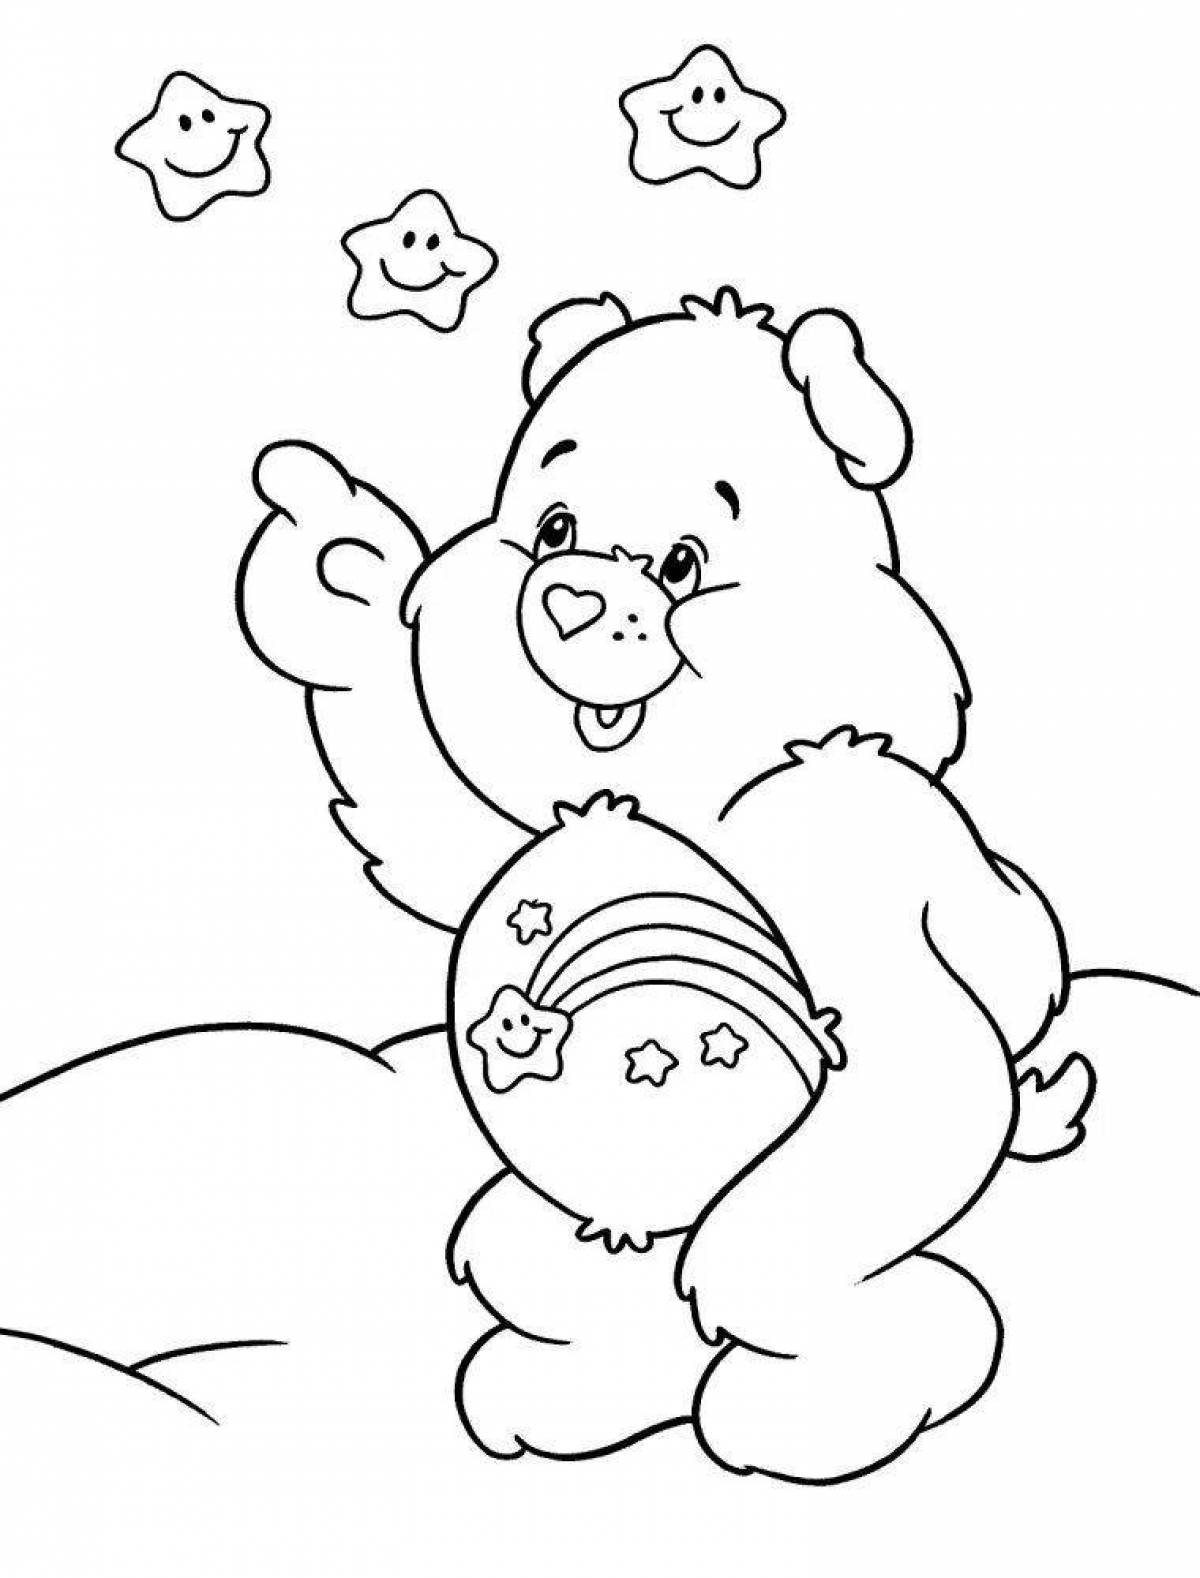 Coloring page cute and hugging bear